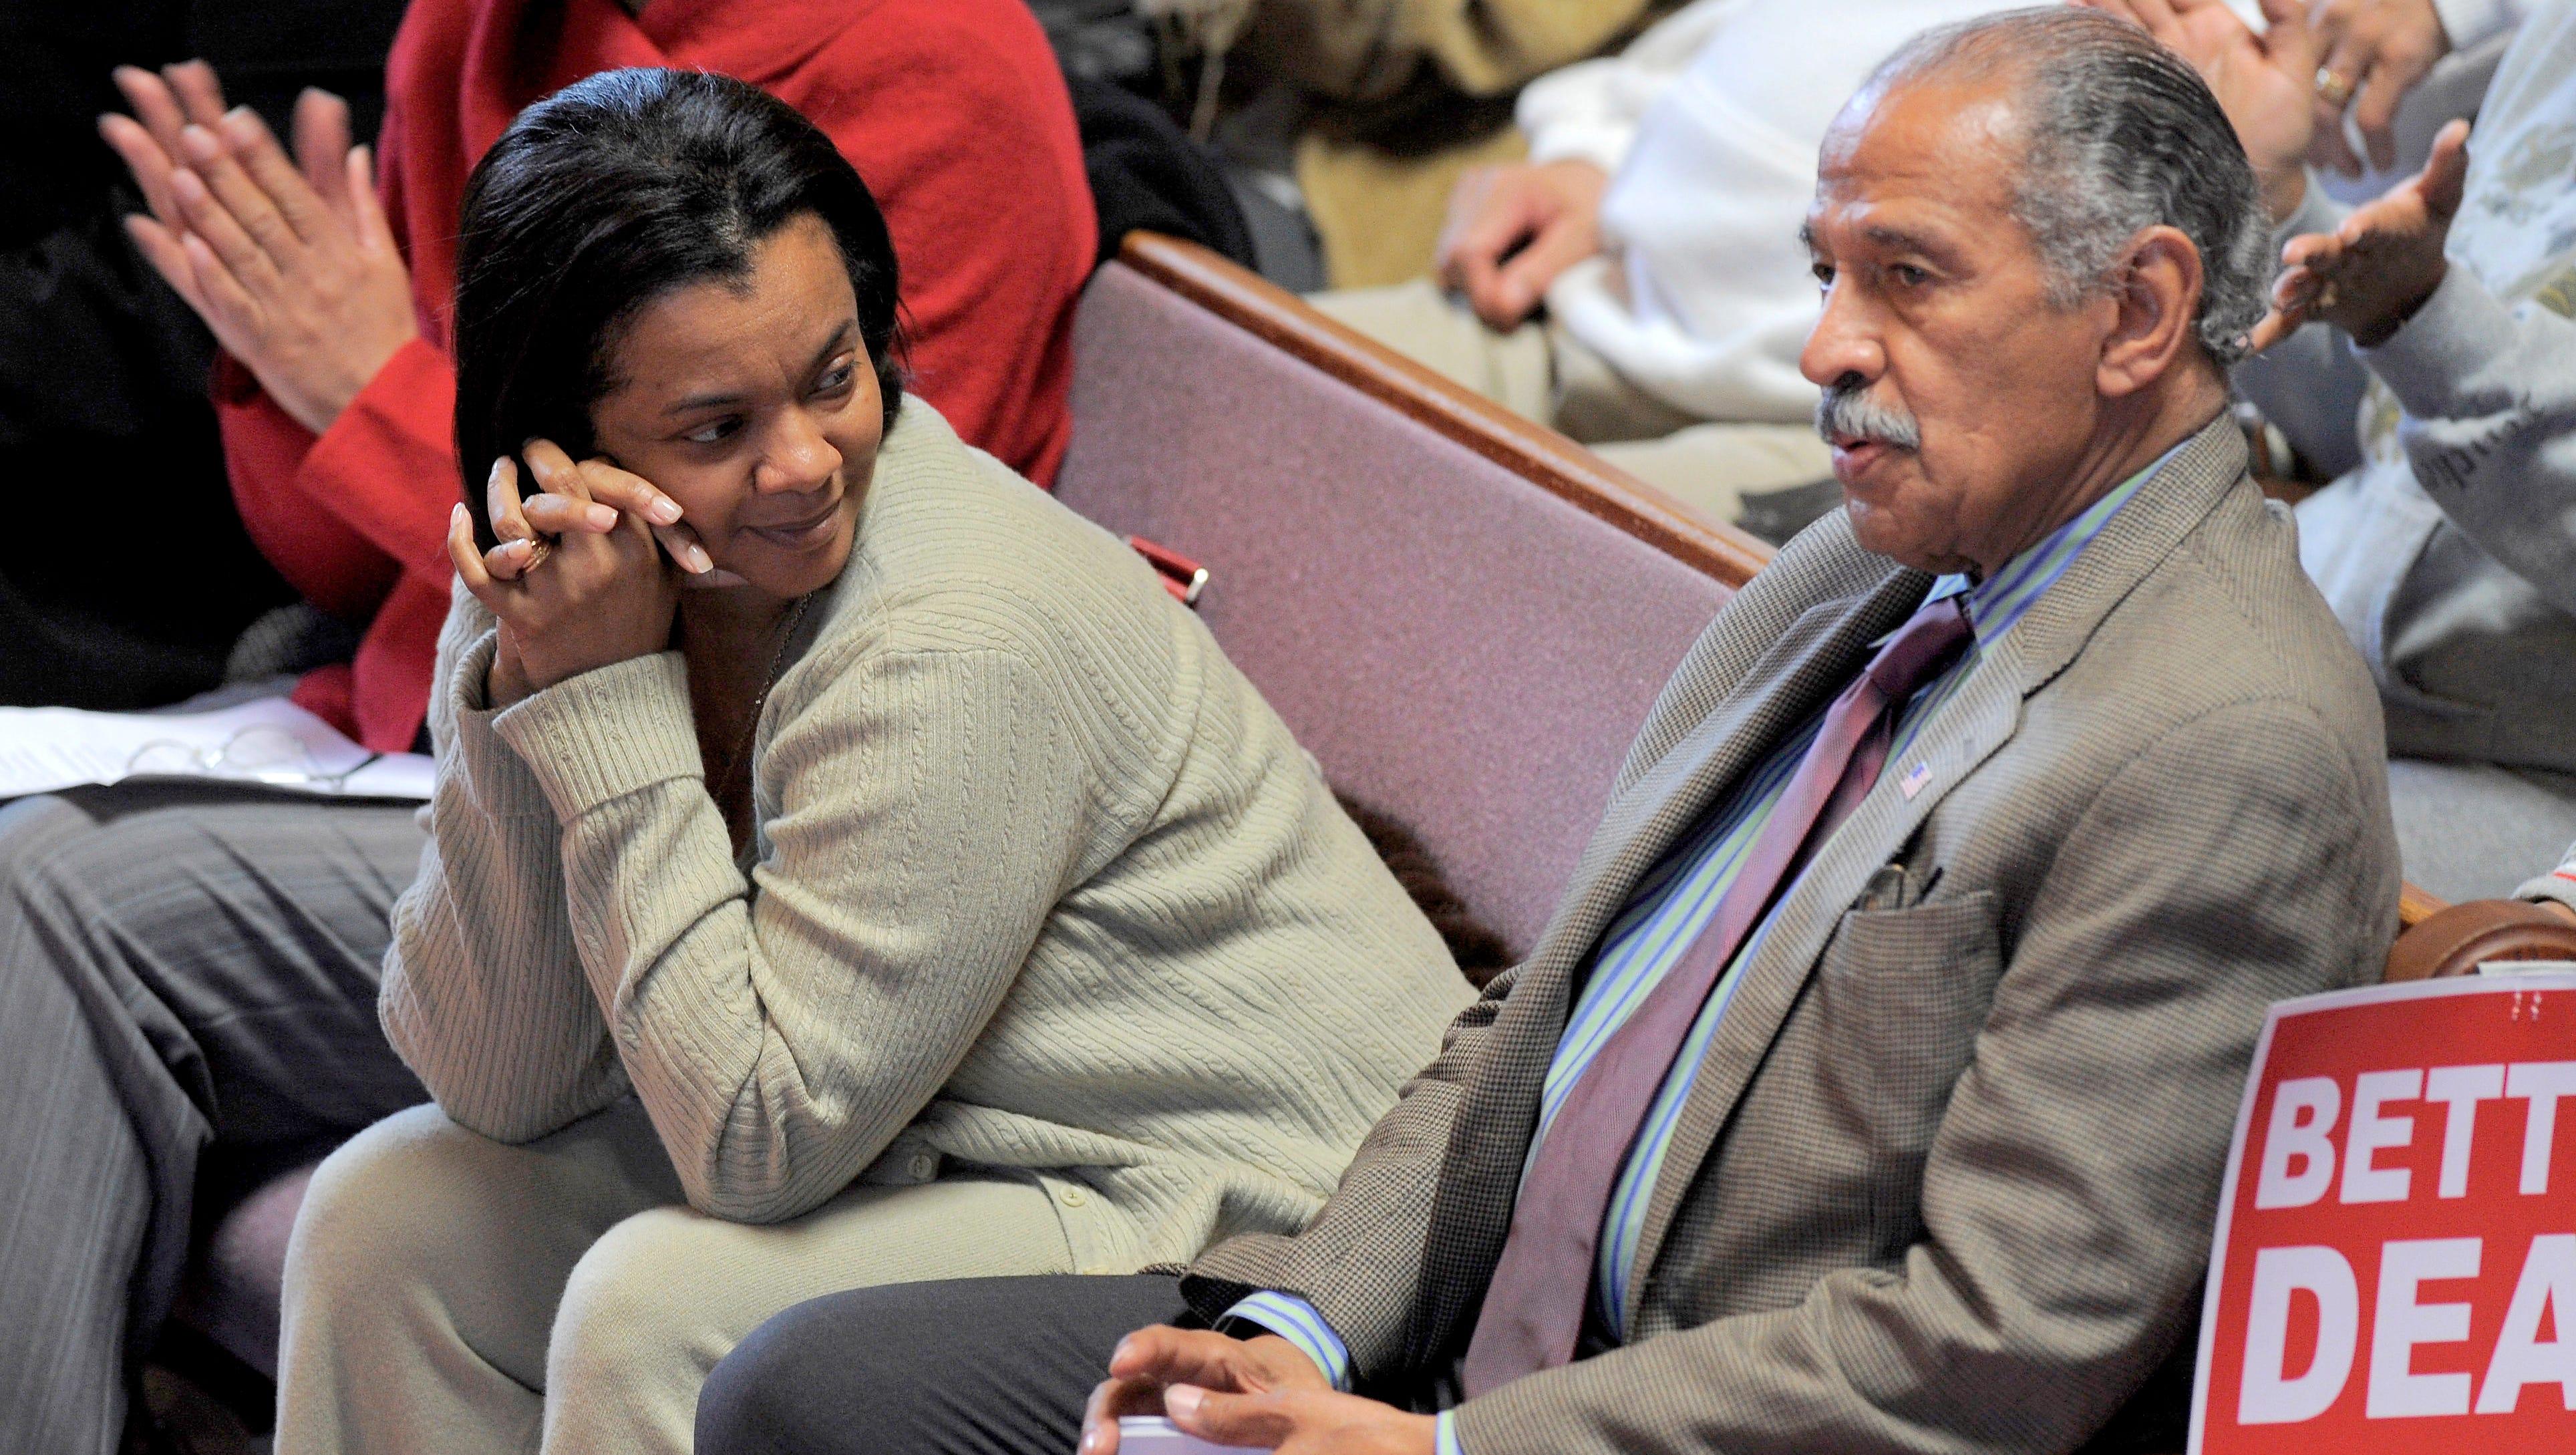 Detroit City Council President Monica Conyers looks at her husband during his introduction at a 2009 rally at Triumph Church in Detroit to oppose the Cobo expansion plan.